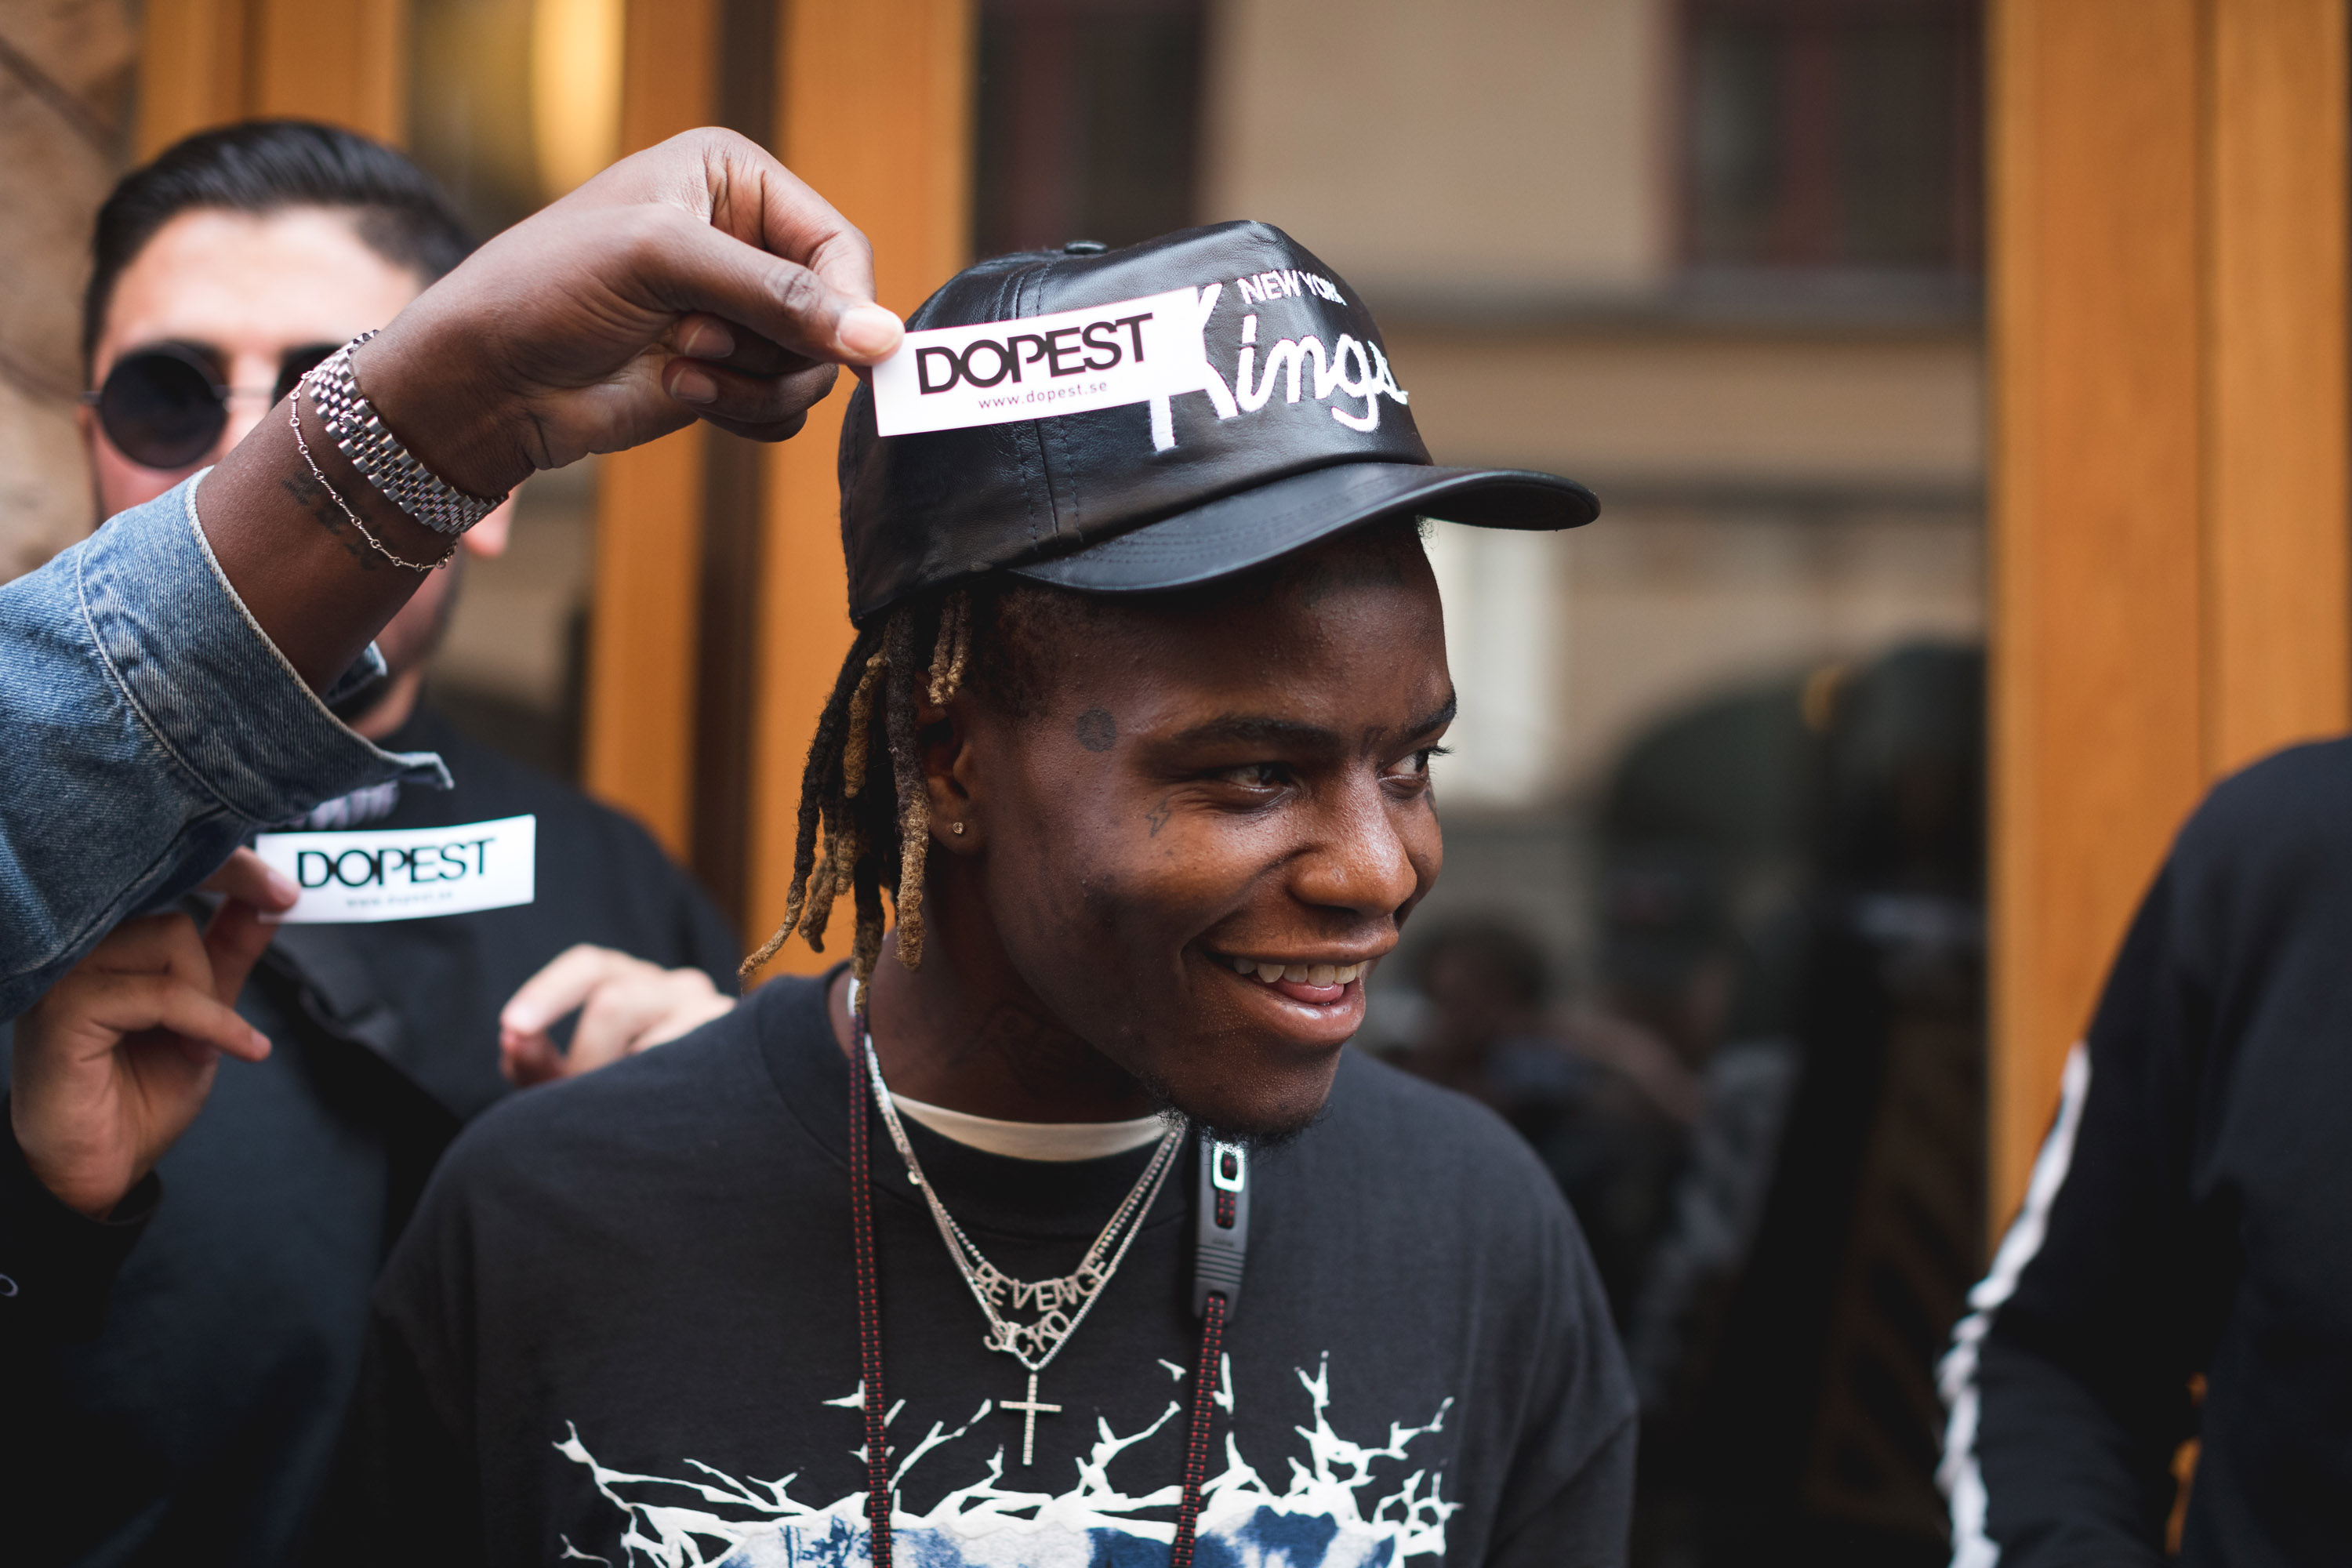 Virgil Abloh and Ian Connor's Suprise Visit at Sweden's First